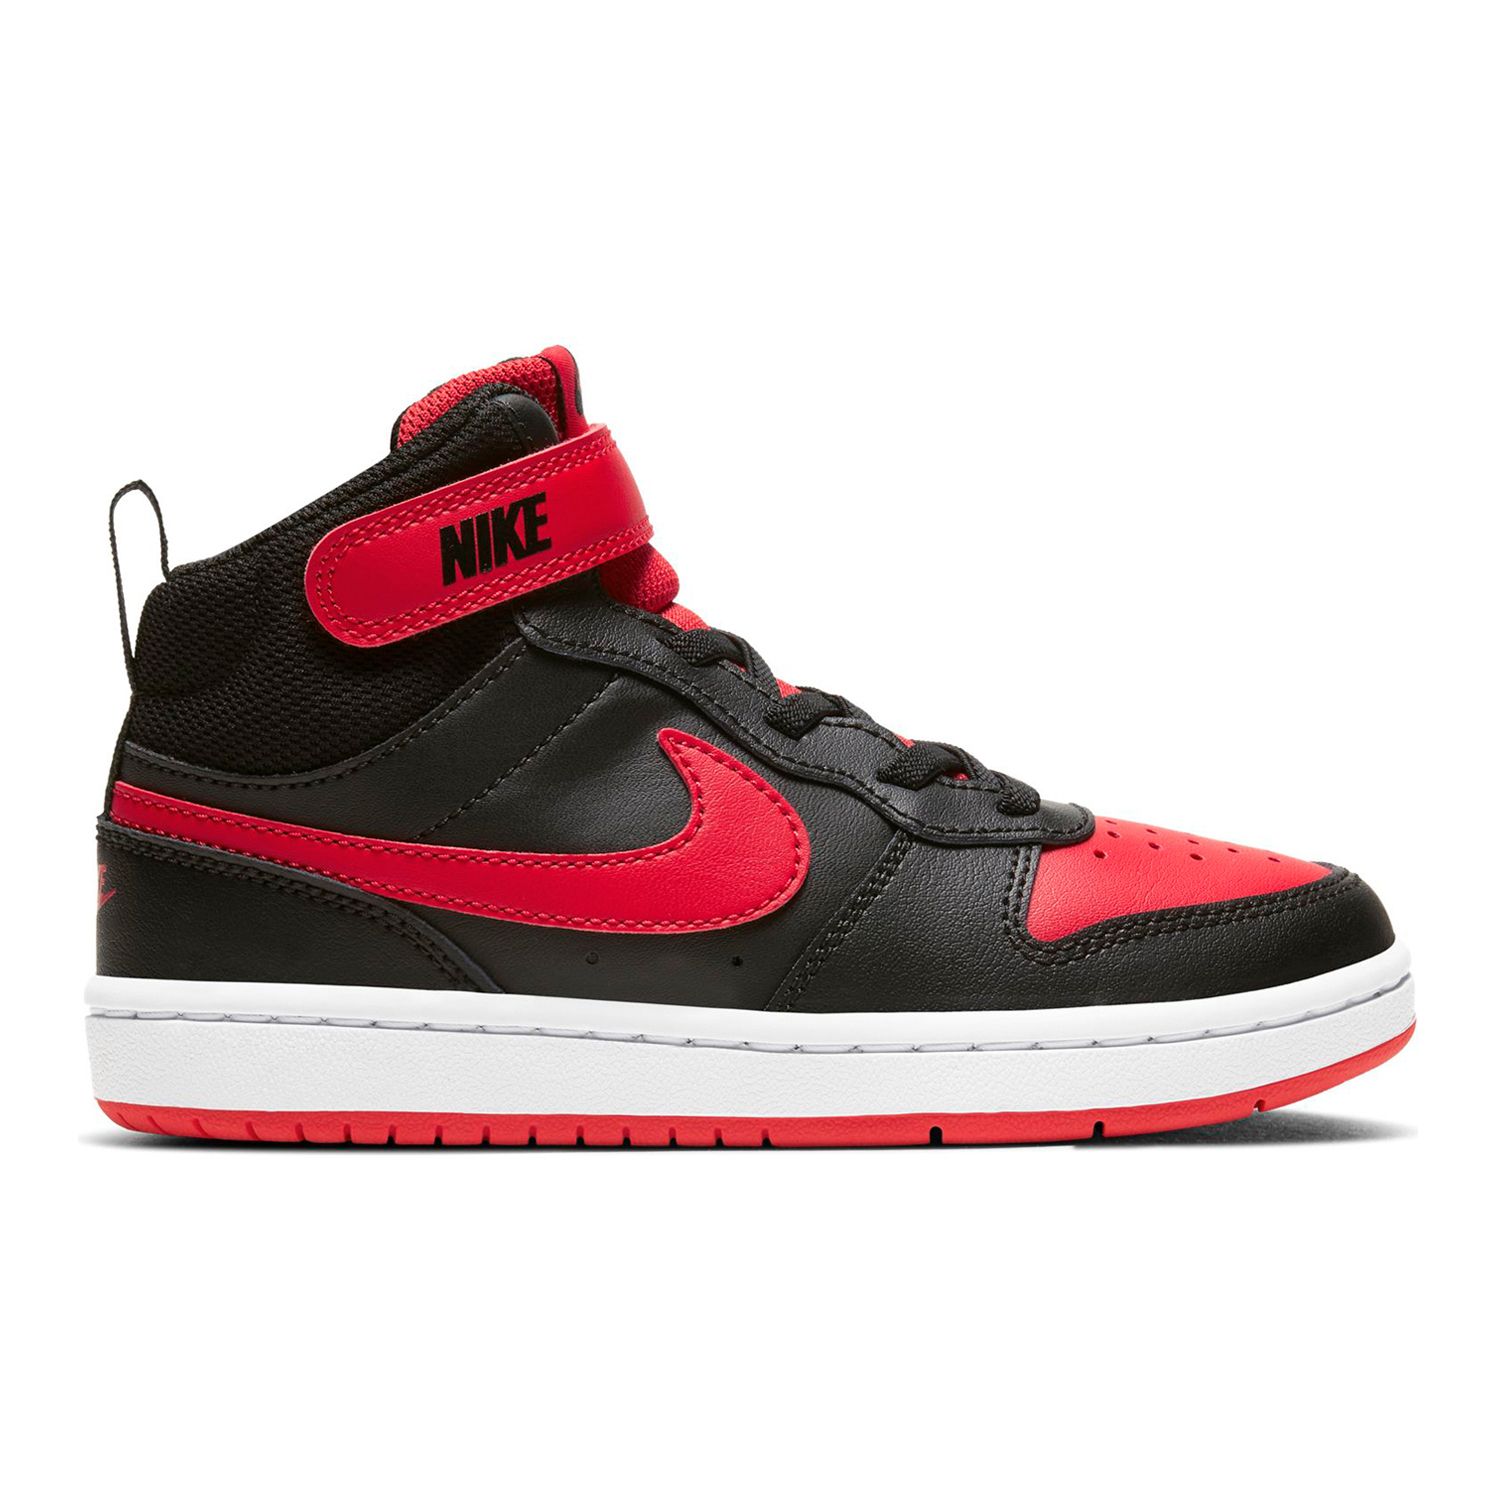 red and black high top nikes